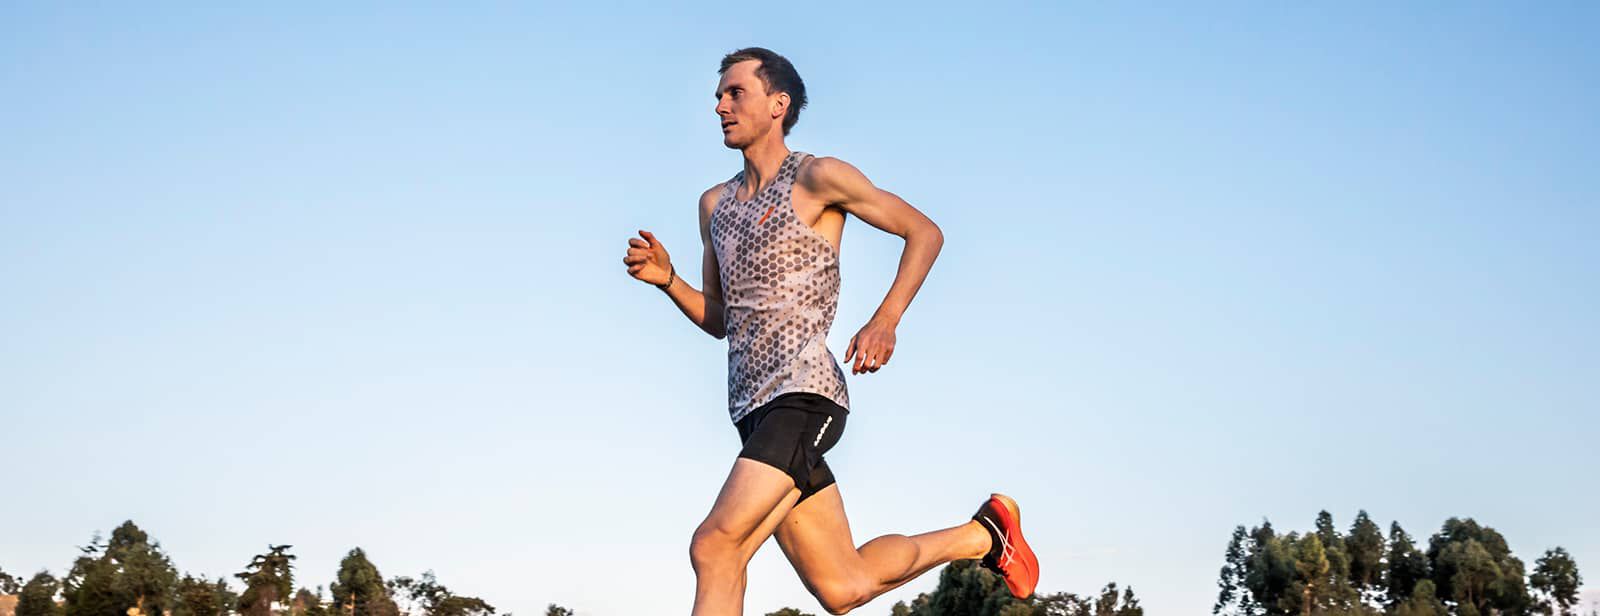 How to Run Faster / Compression Clothing Benefits | ASICS